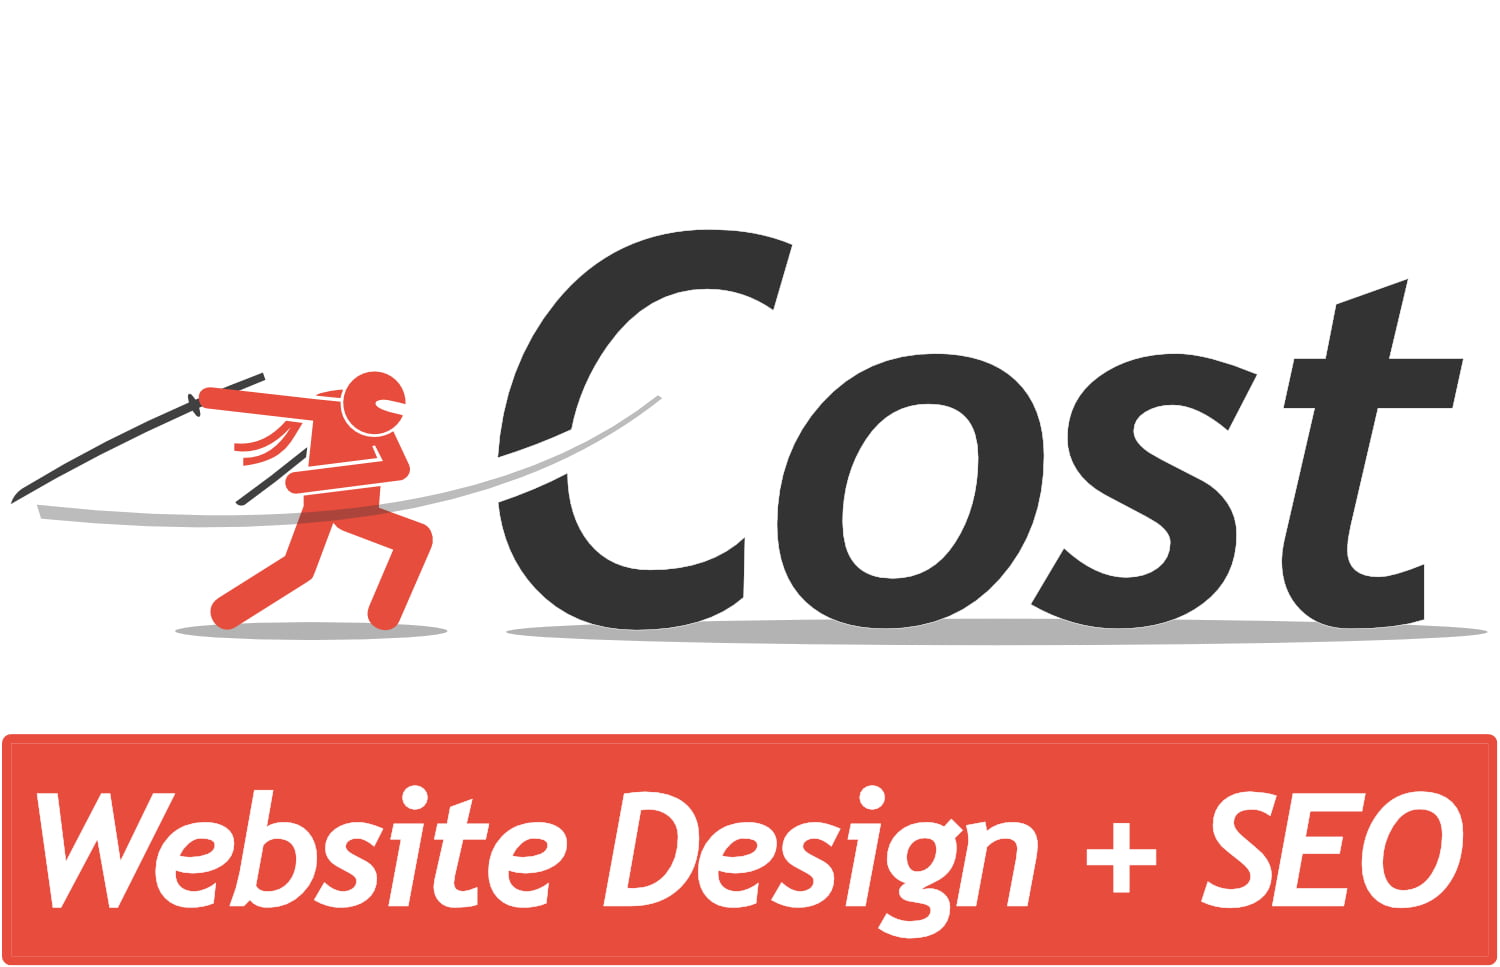 How much do websites cost?